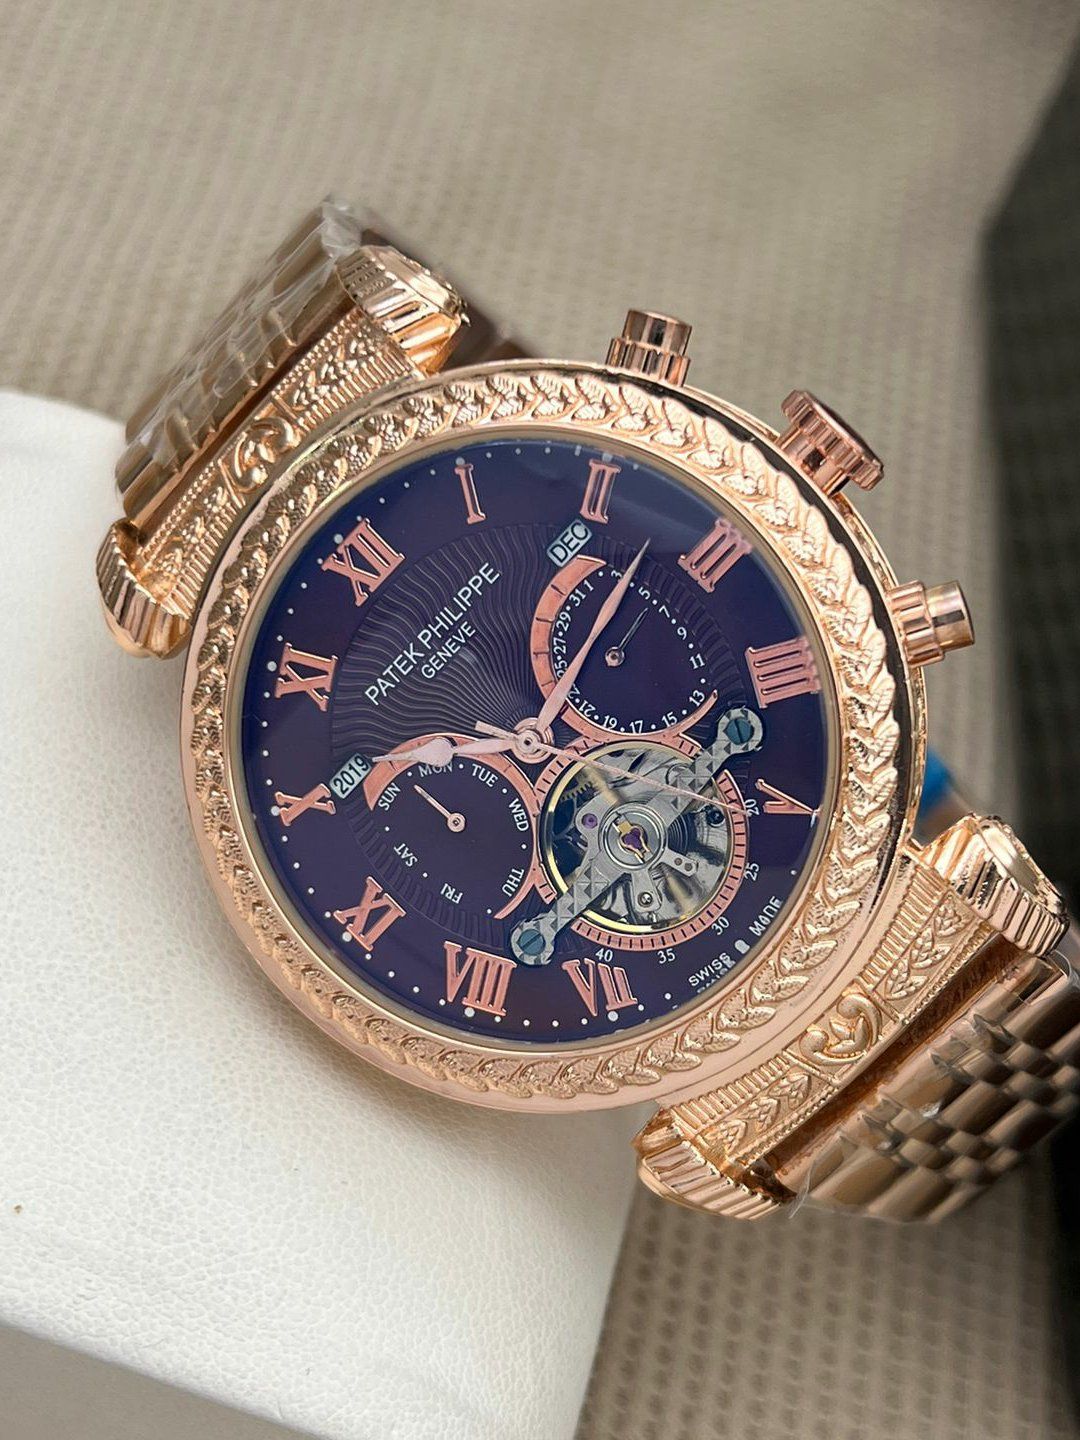 Understated but 'never easy': Why collectors covet Patek Philippe | CNN